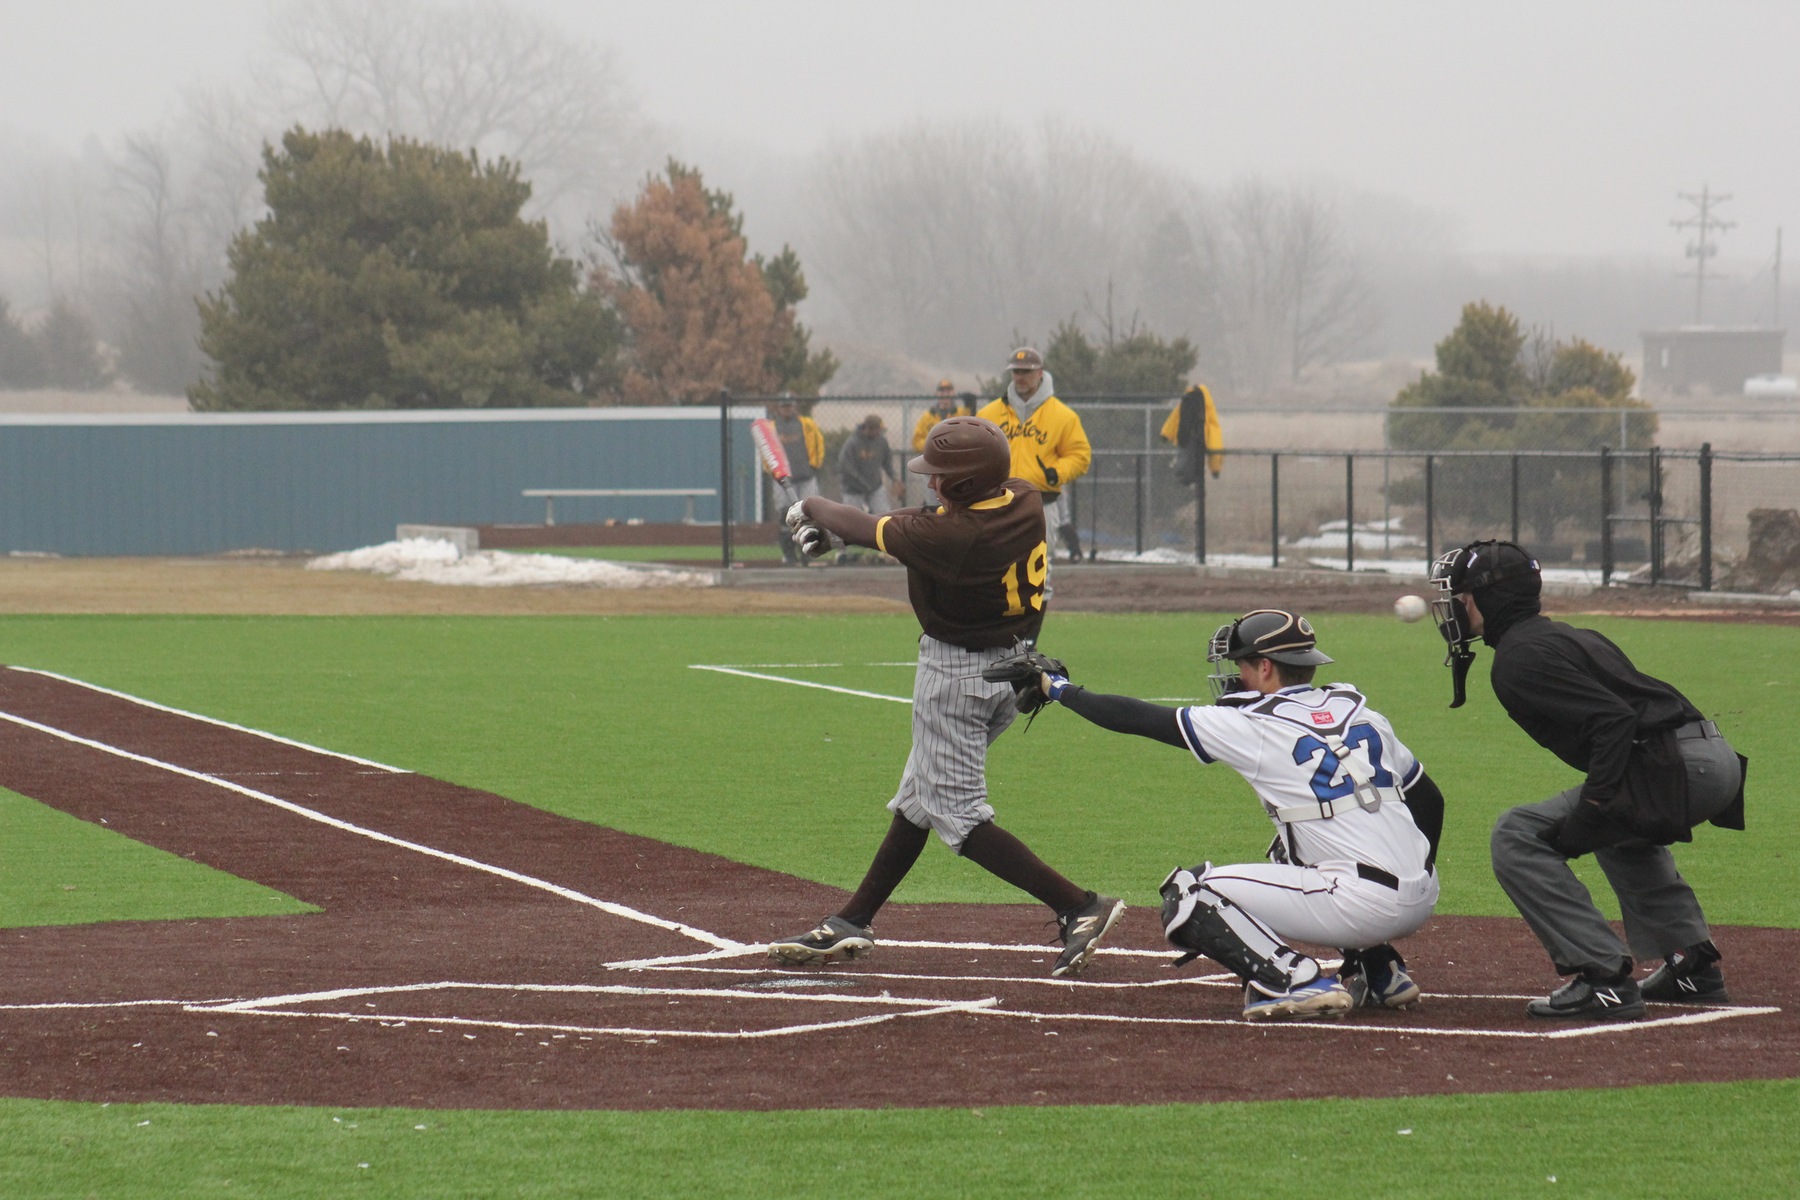 Missed chances cost the Broncbusters in game two